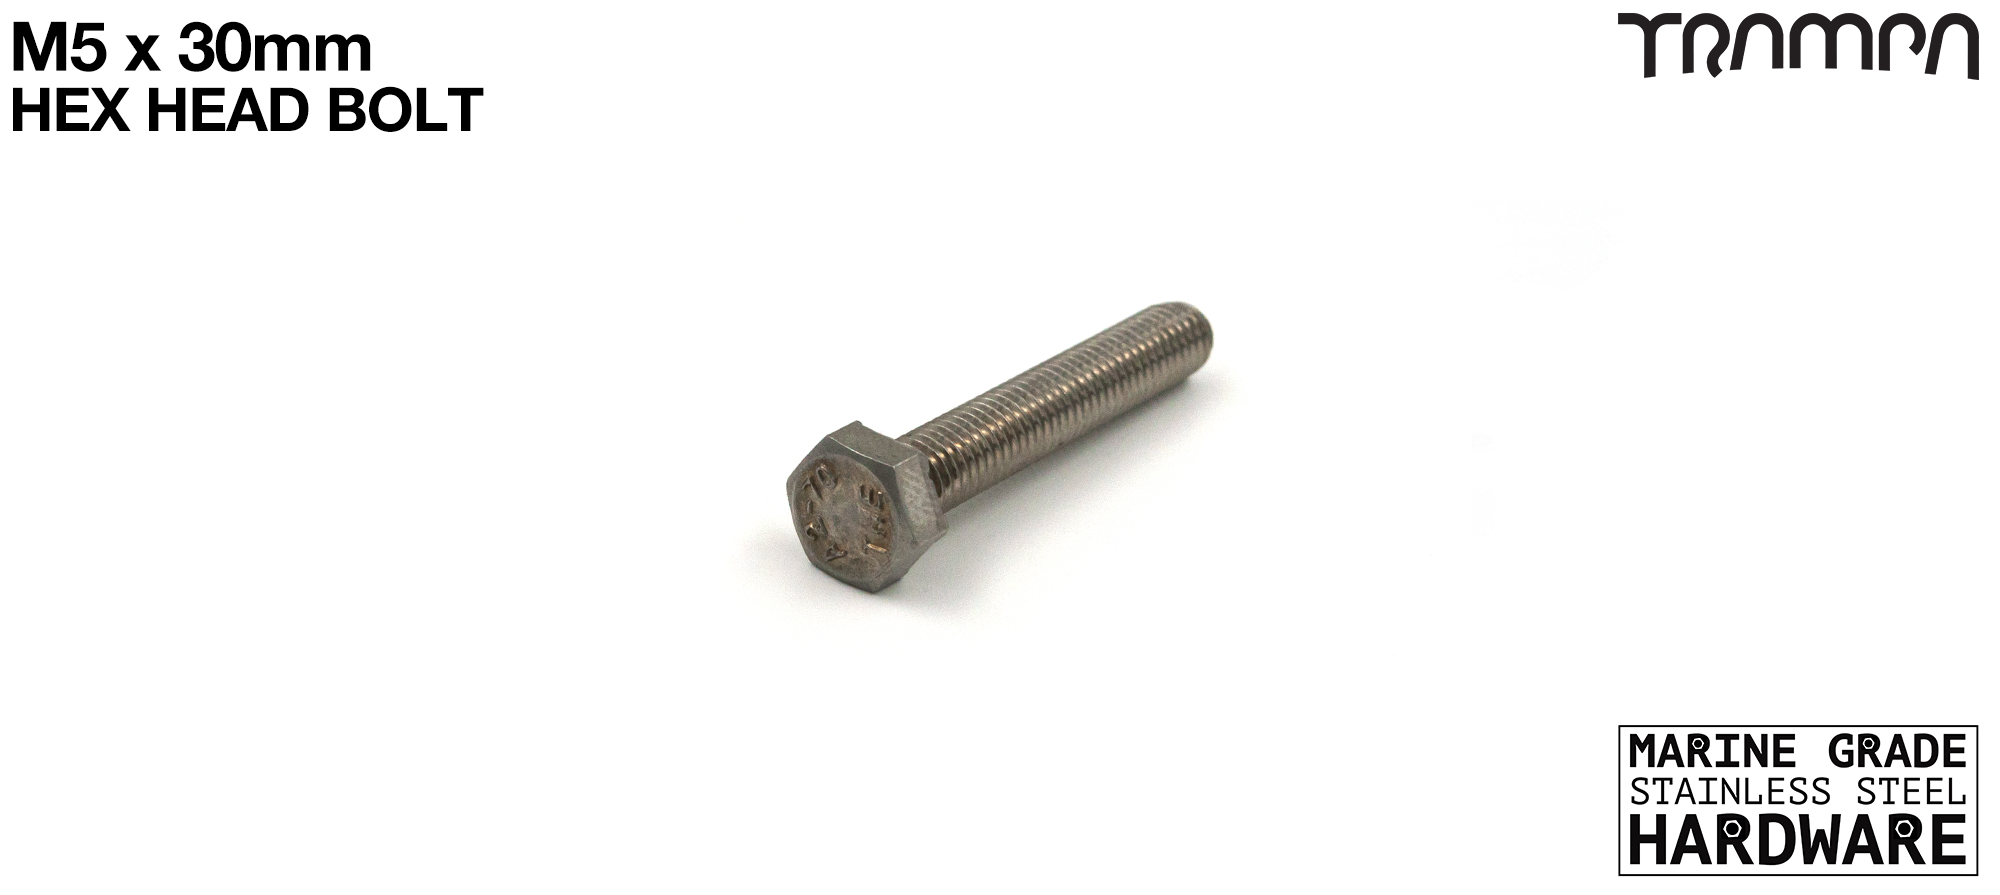 Yes please - Complete deck Bolt Kit (+£7.50)